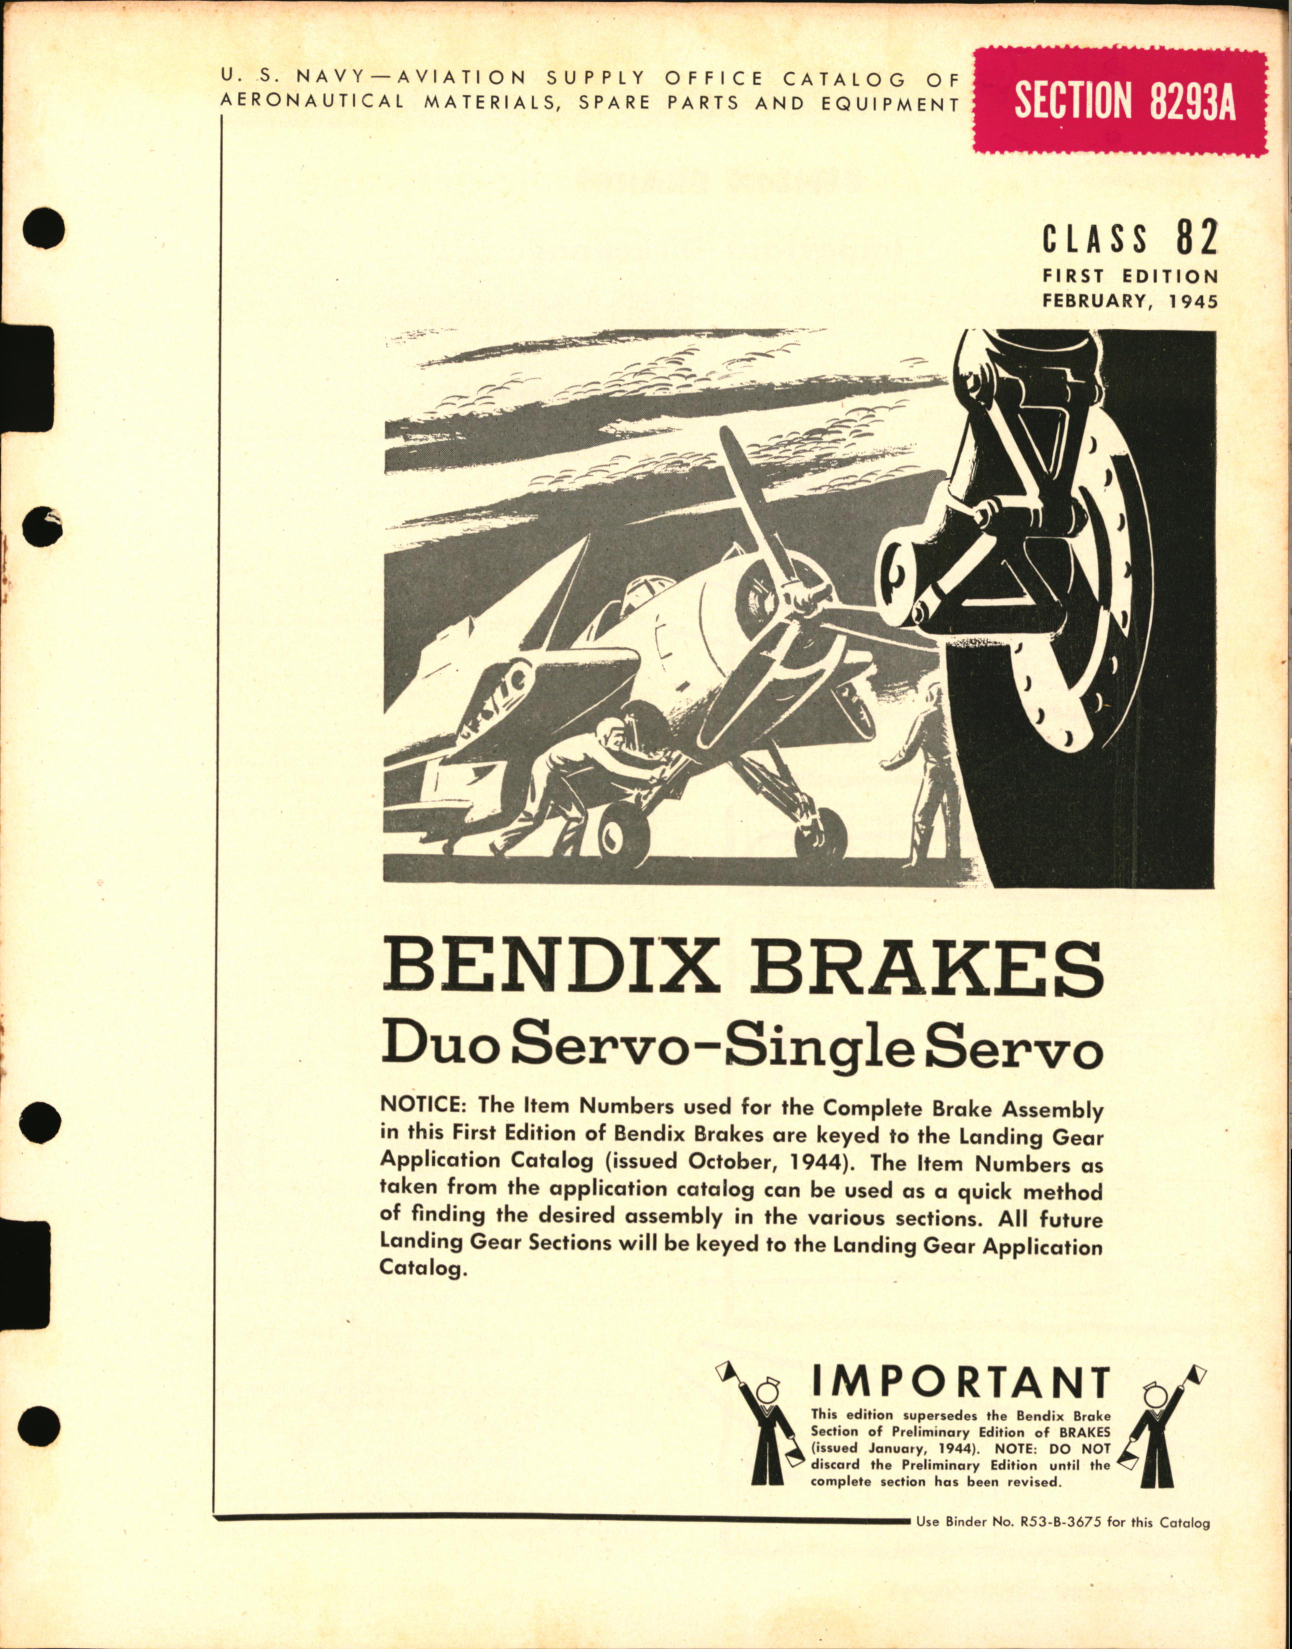 Sample page 1 from AirCorps Library document: Bendix Brakes, Duo Servo and Single Servo